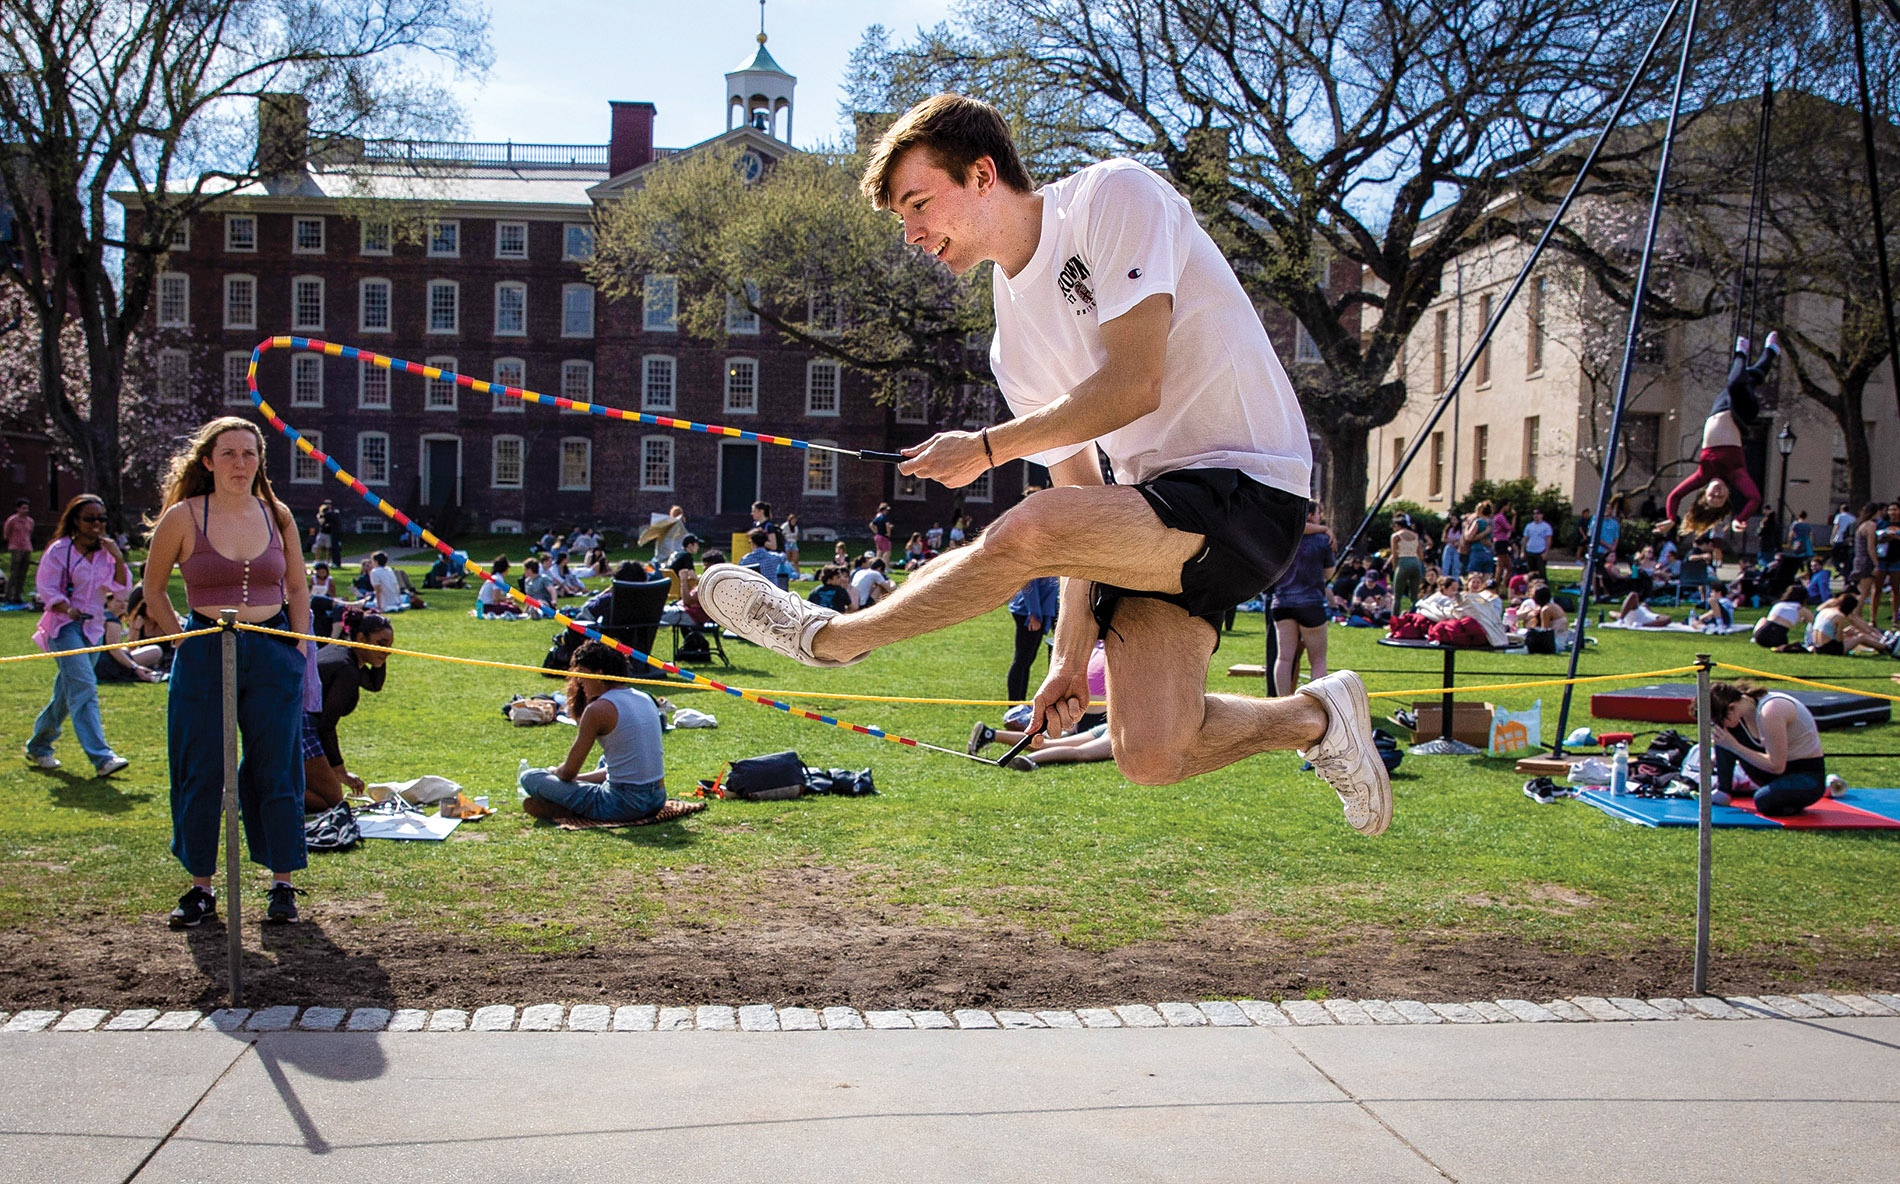 Image of Connor Kraska in-air jump-roping on the campus green.